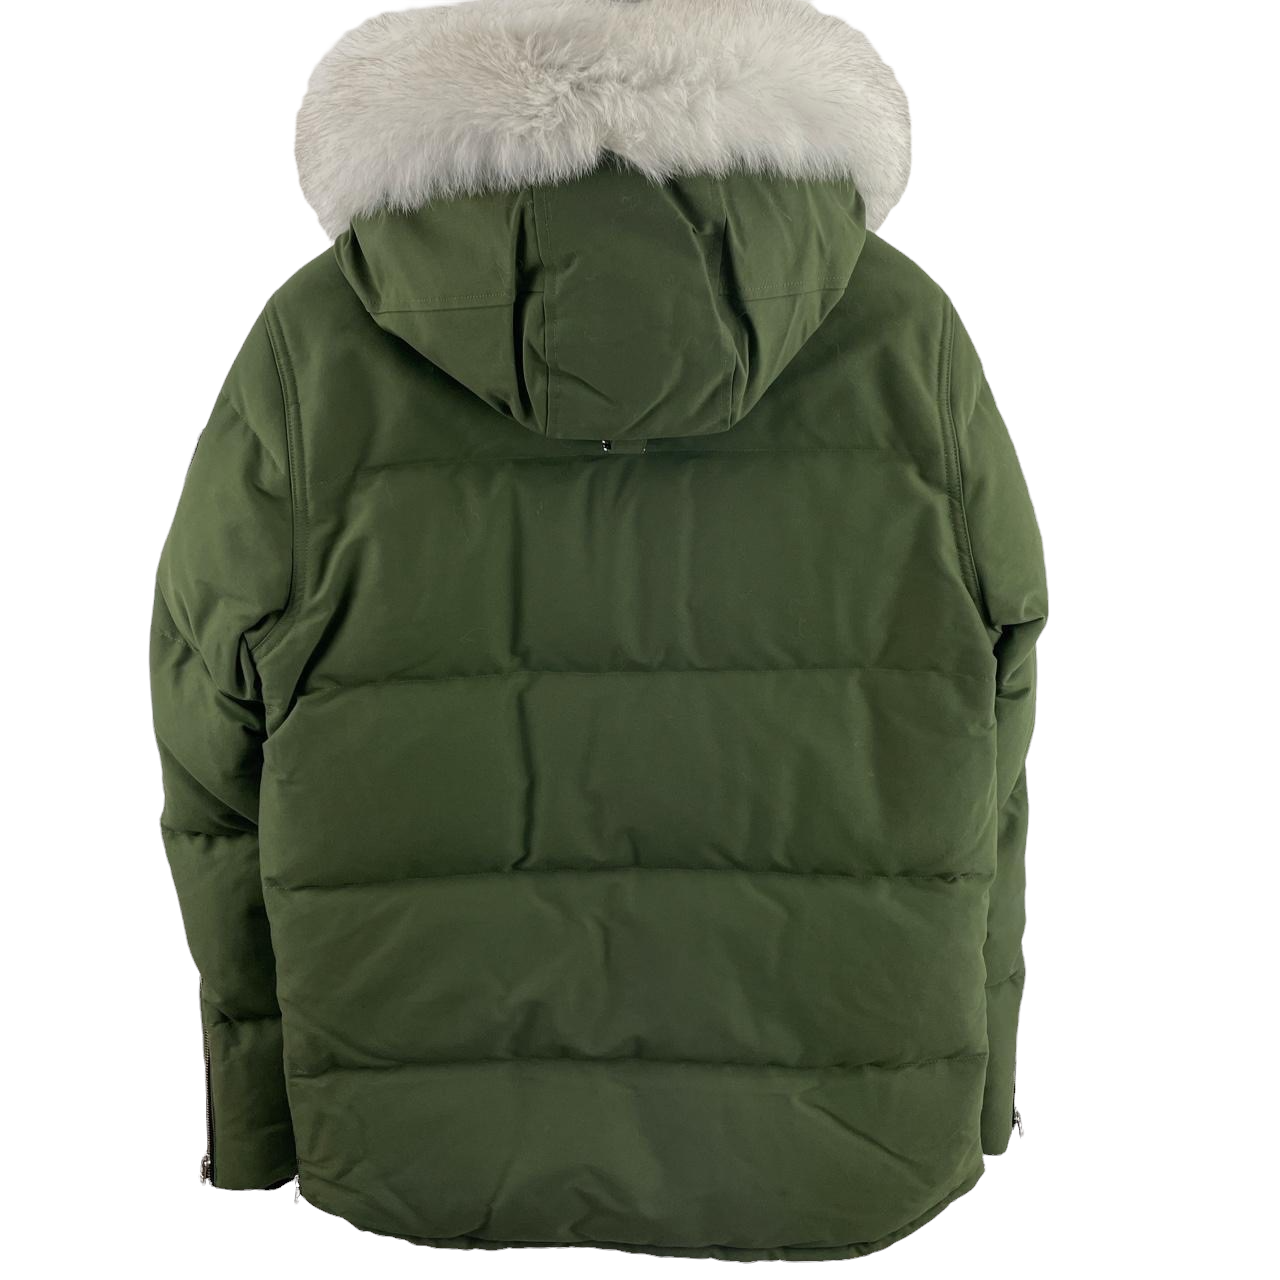 MOOSE KNUCKLES 3Q HOODED PARKA JACKET - ARMY GREEN